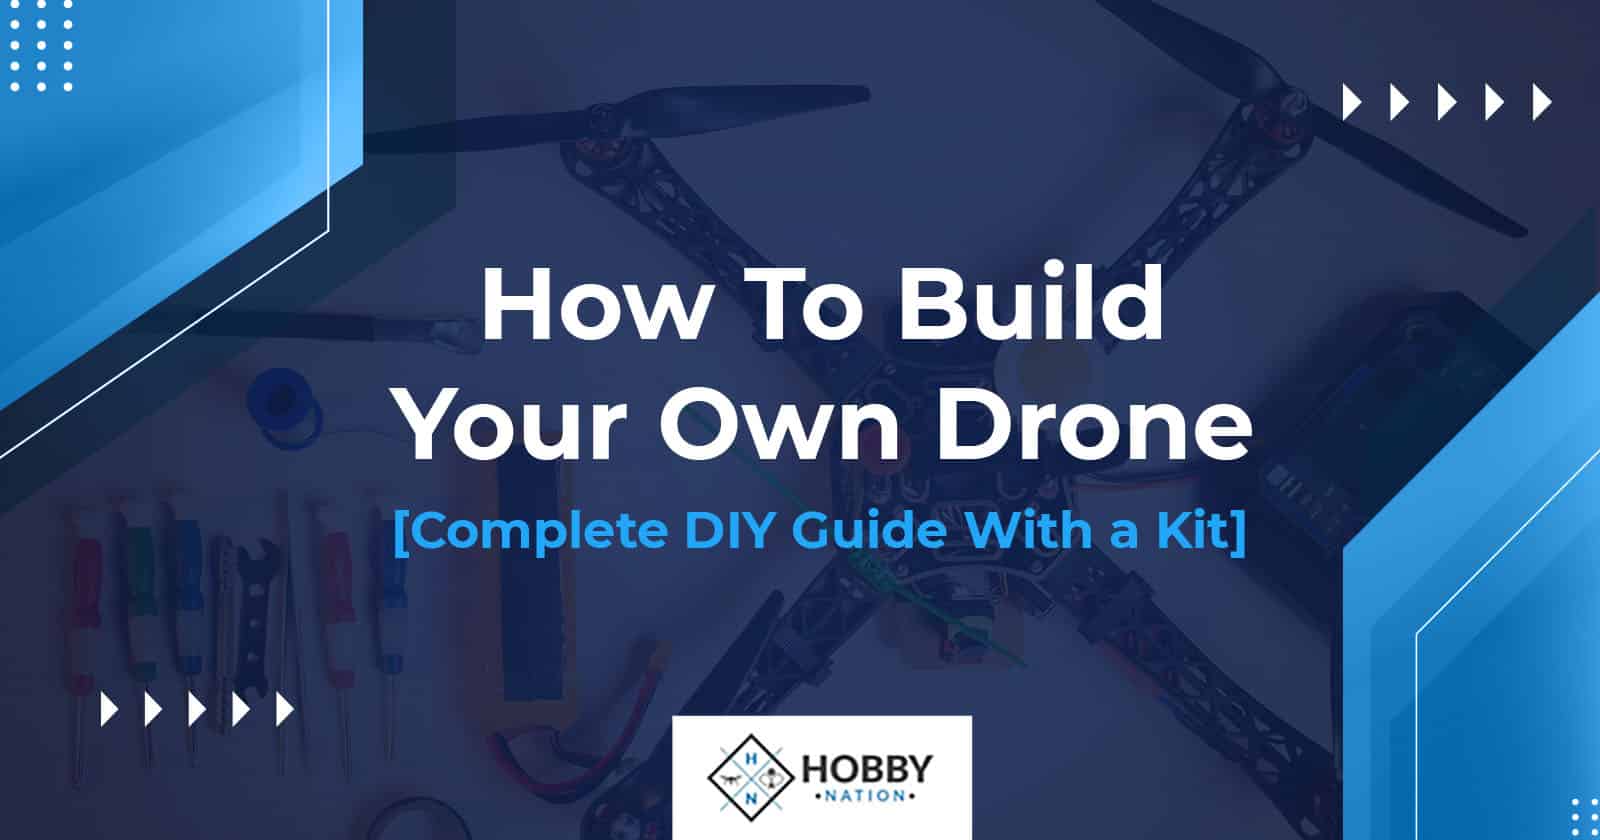 How To Build Your Own Drone [Complete DIY Guide With a Kit]